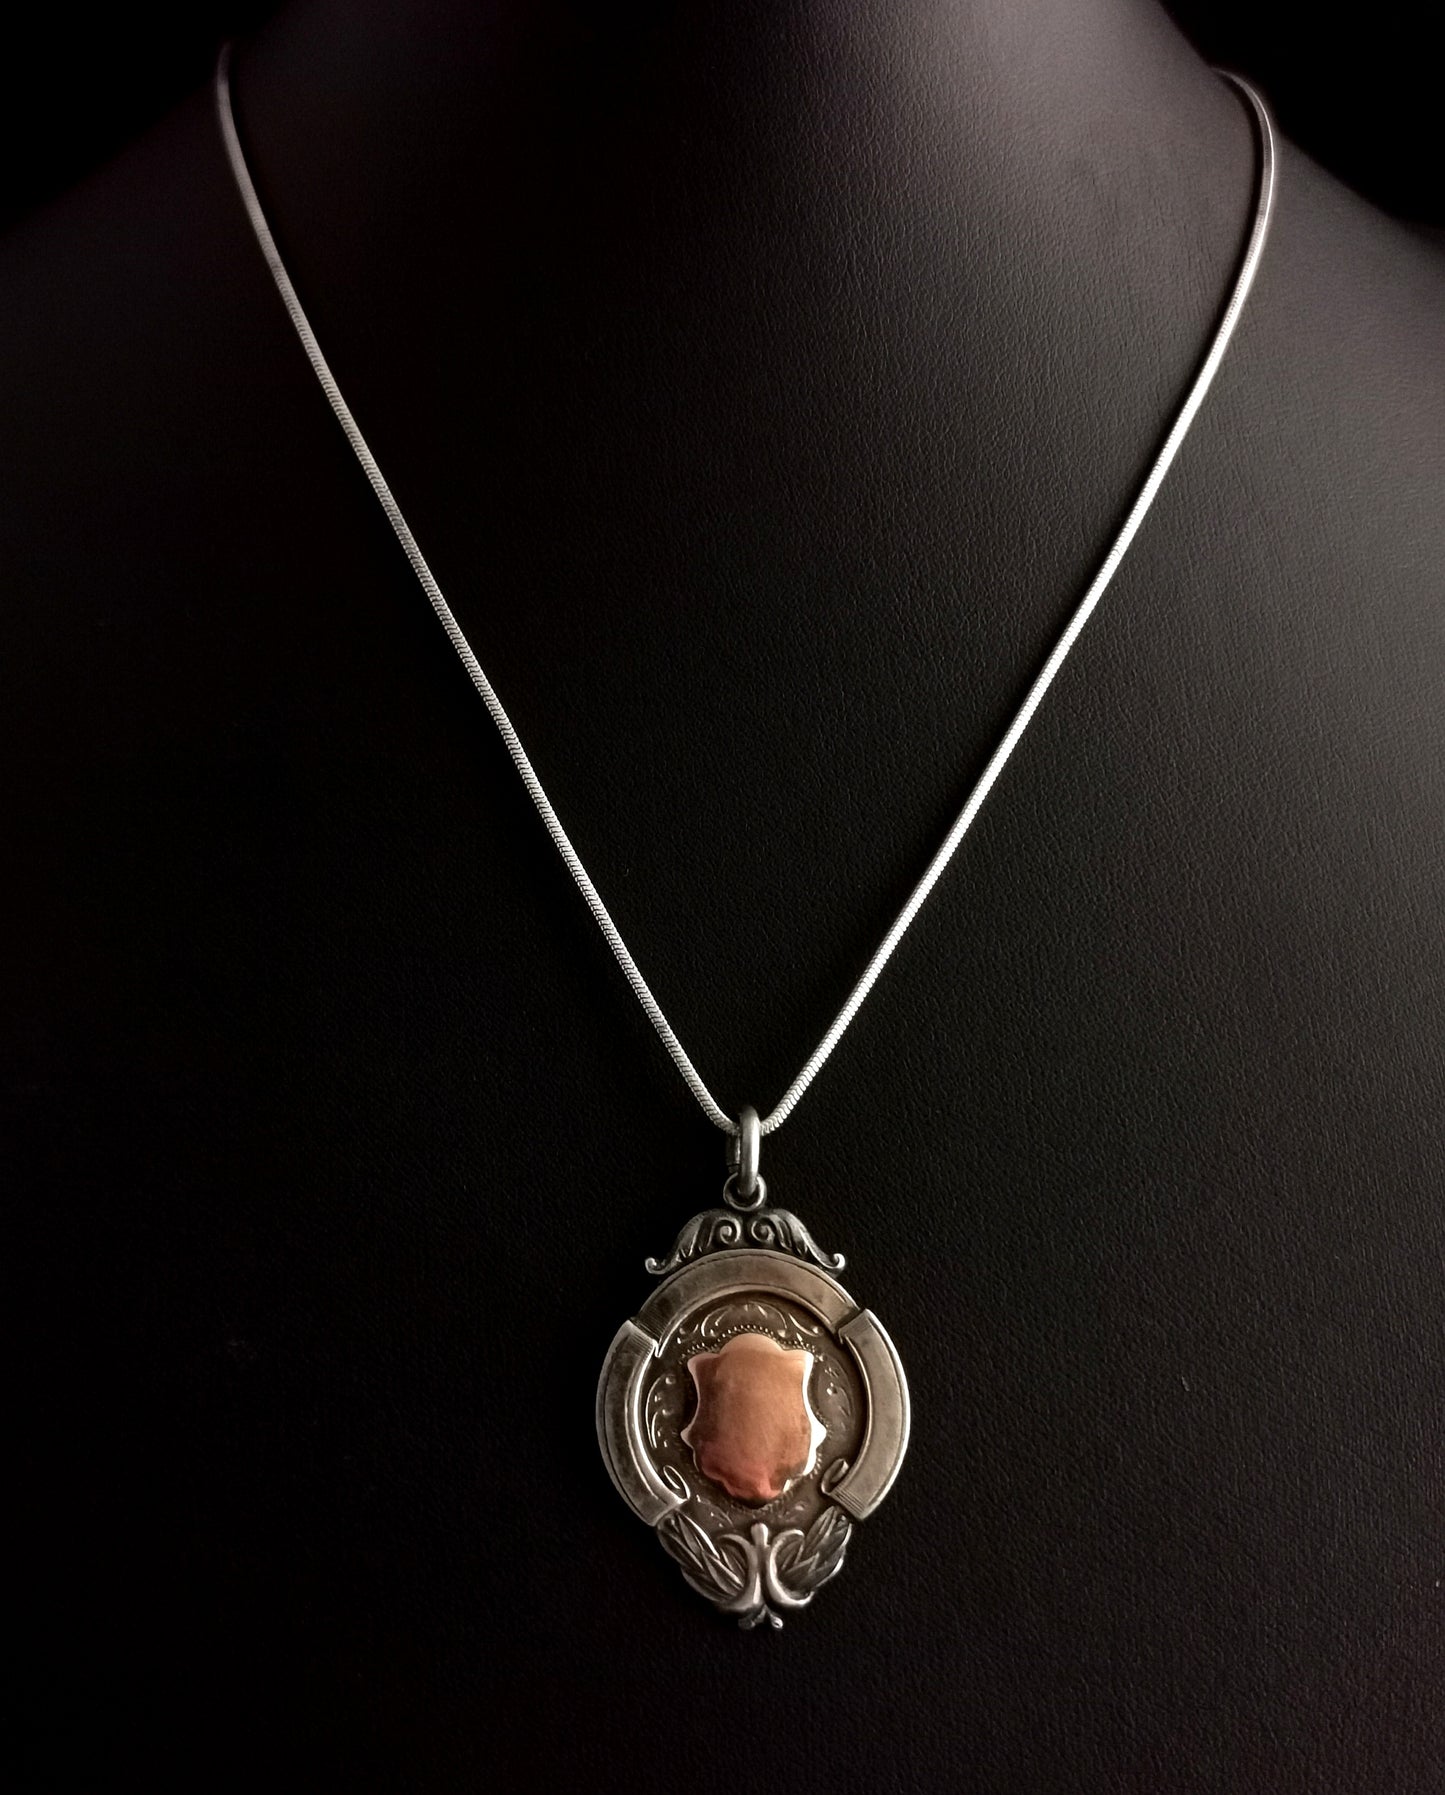 Vintage Sterling silver and 9ct Rose gold fob, snake chain necklace